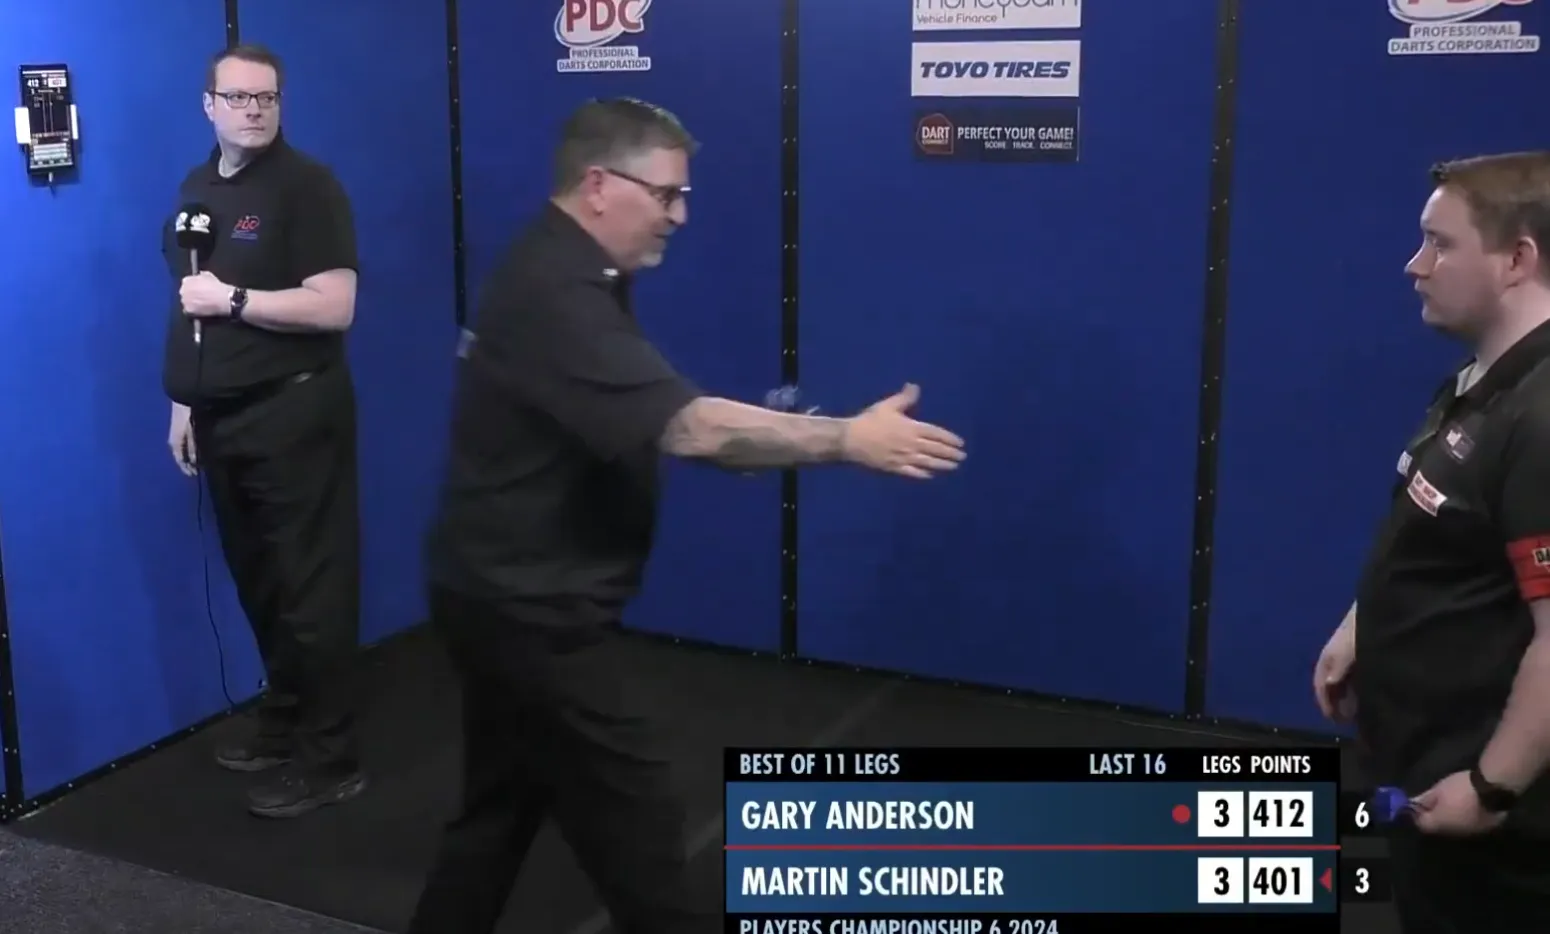 2024 03 19 17 10 51 pdc darts op x its a walkover for martin schindler as gary anderson is forced